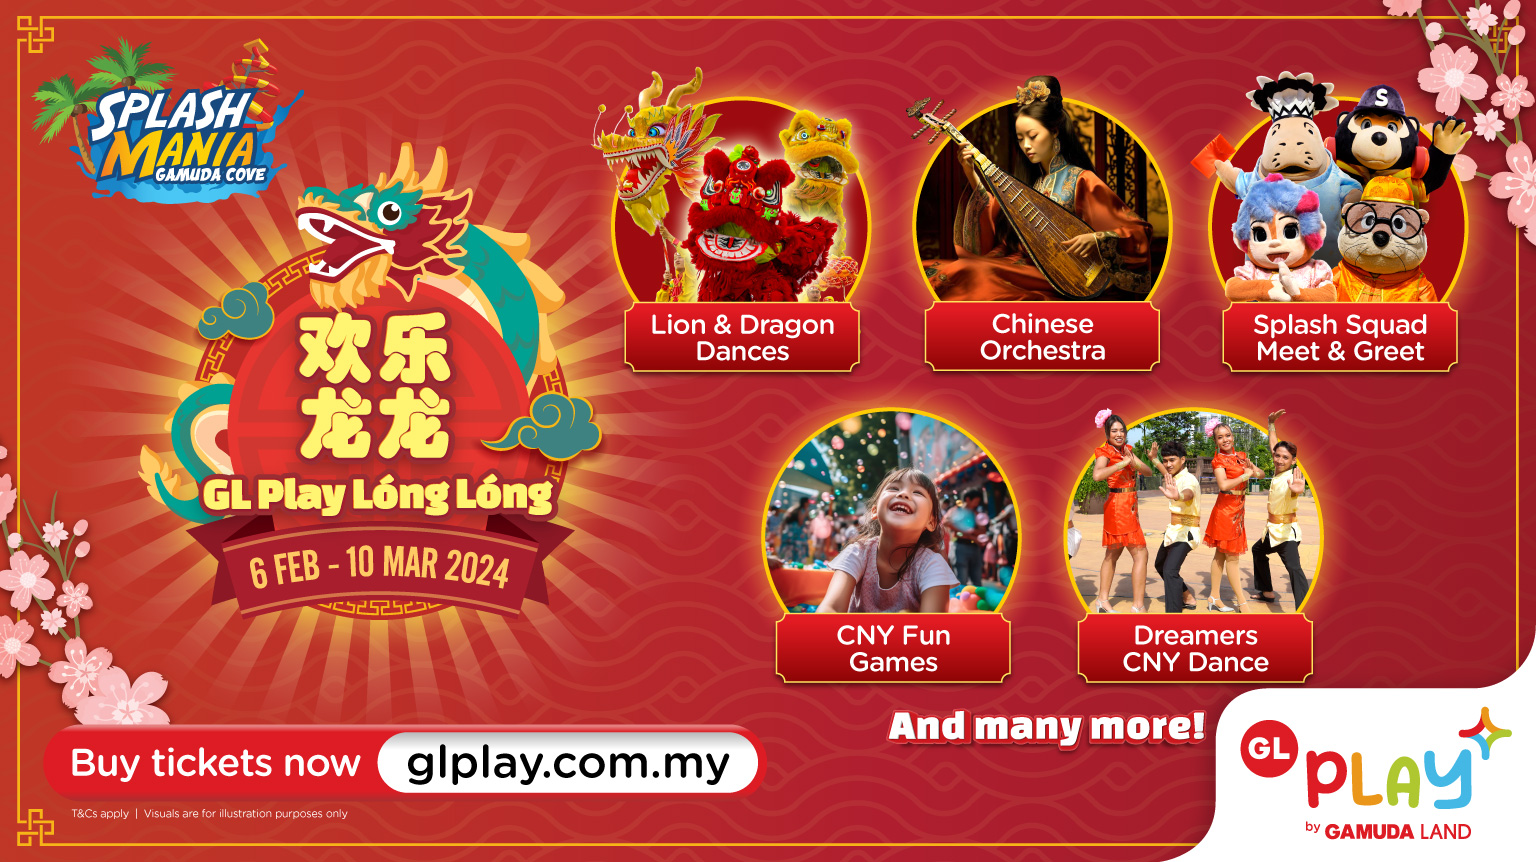 Splash into the Year of the Dragon with GL Play's Splashmania "Play Lóng Lóng"!